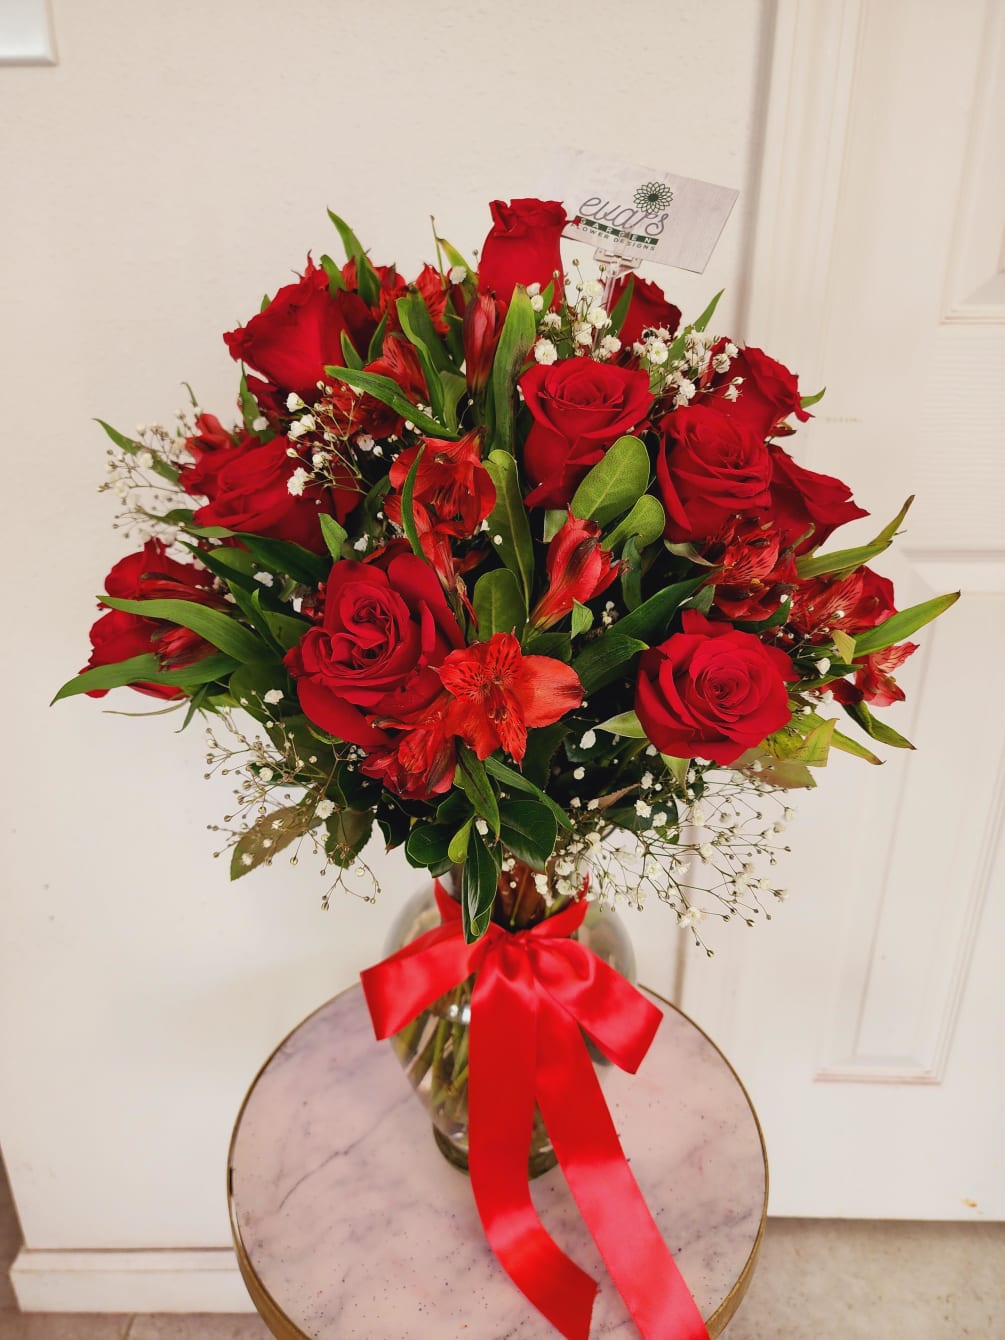 Crystal vase arrangement with 24 red, vivid roses, various stems of red